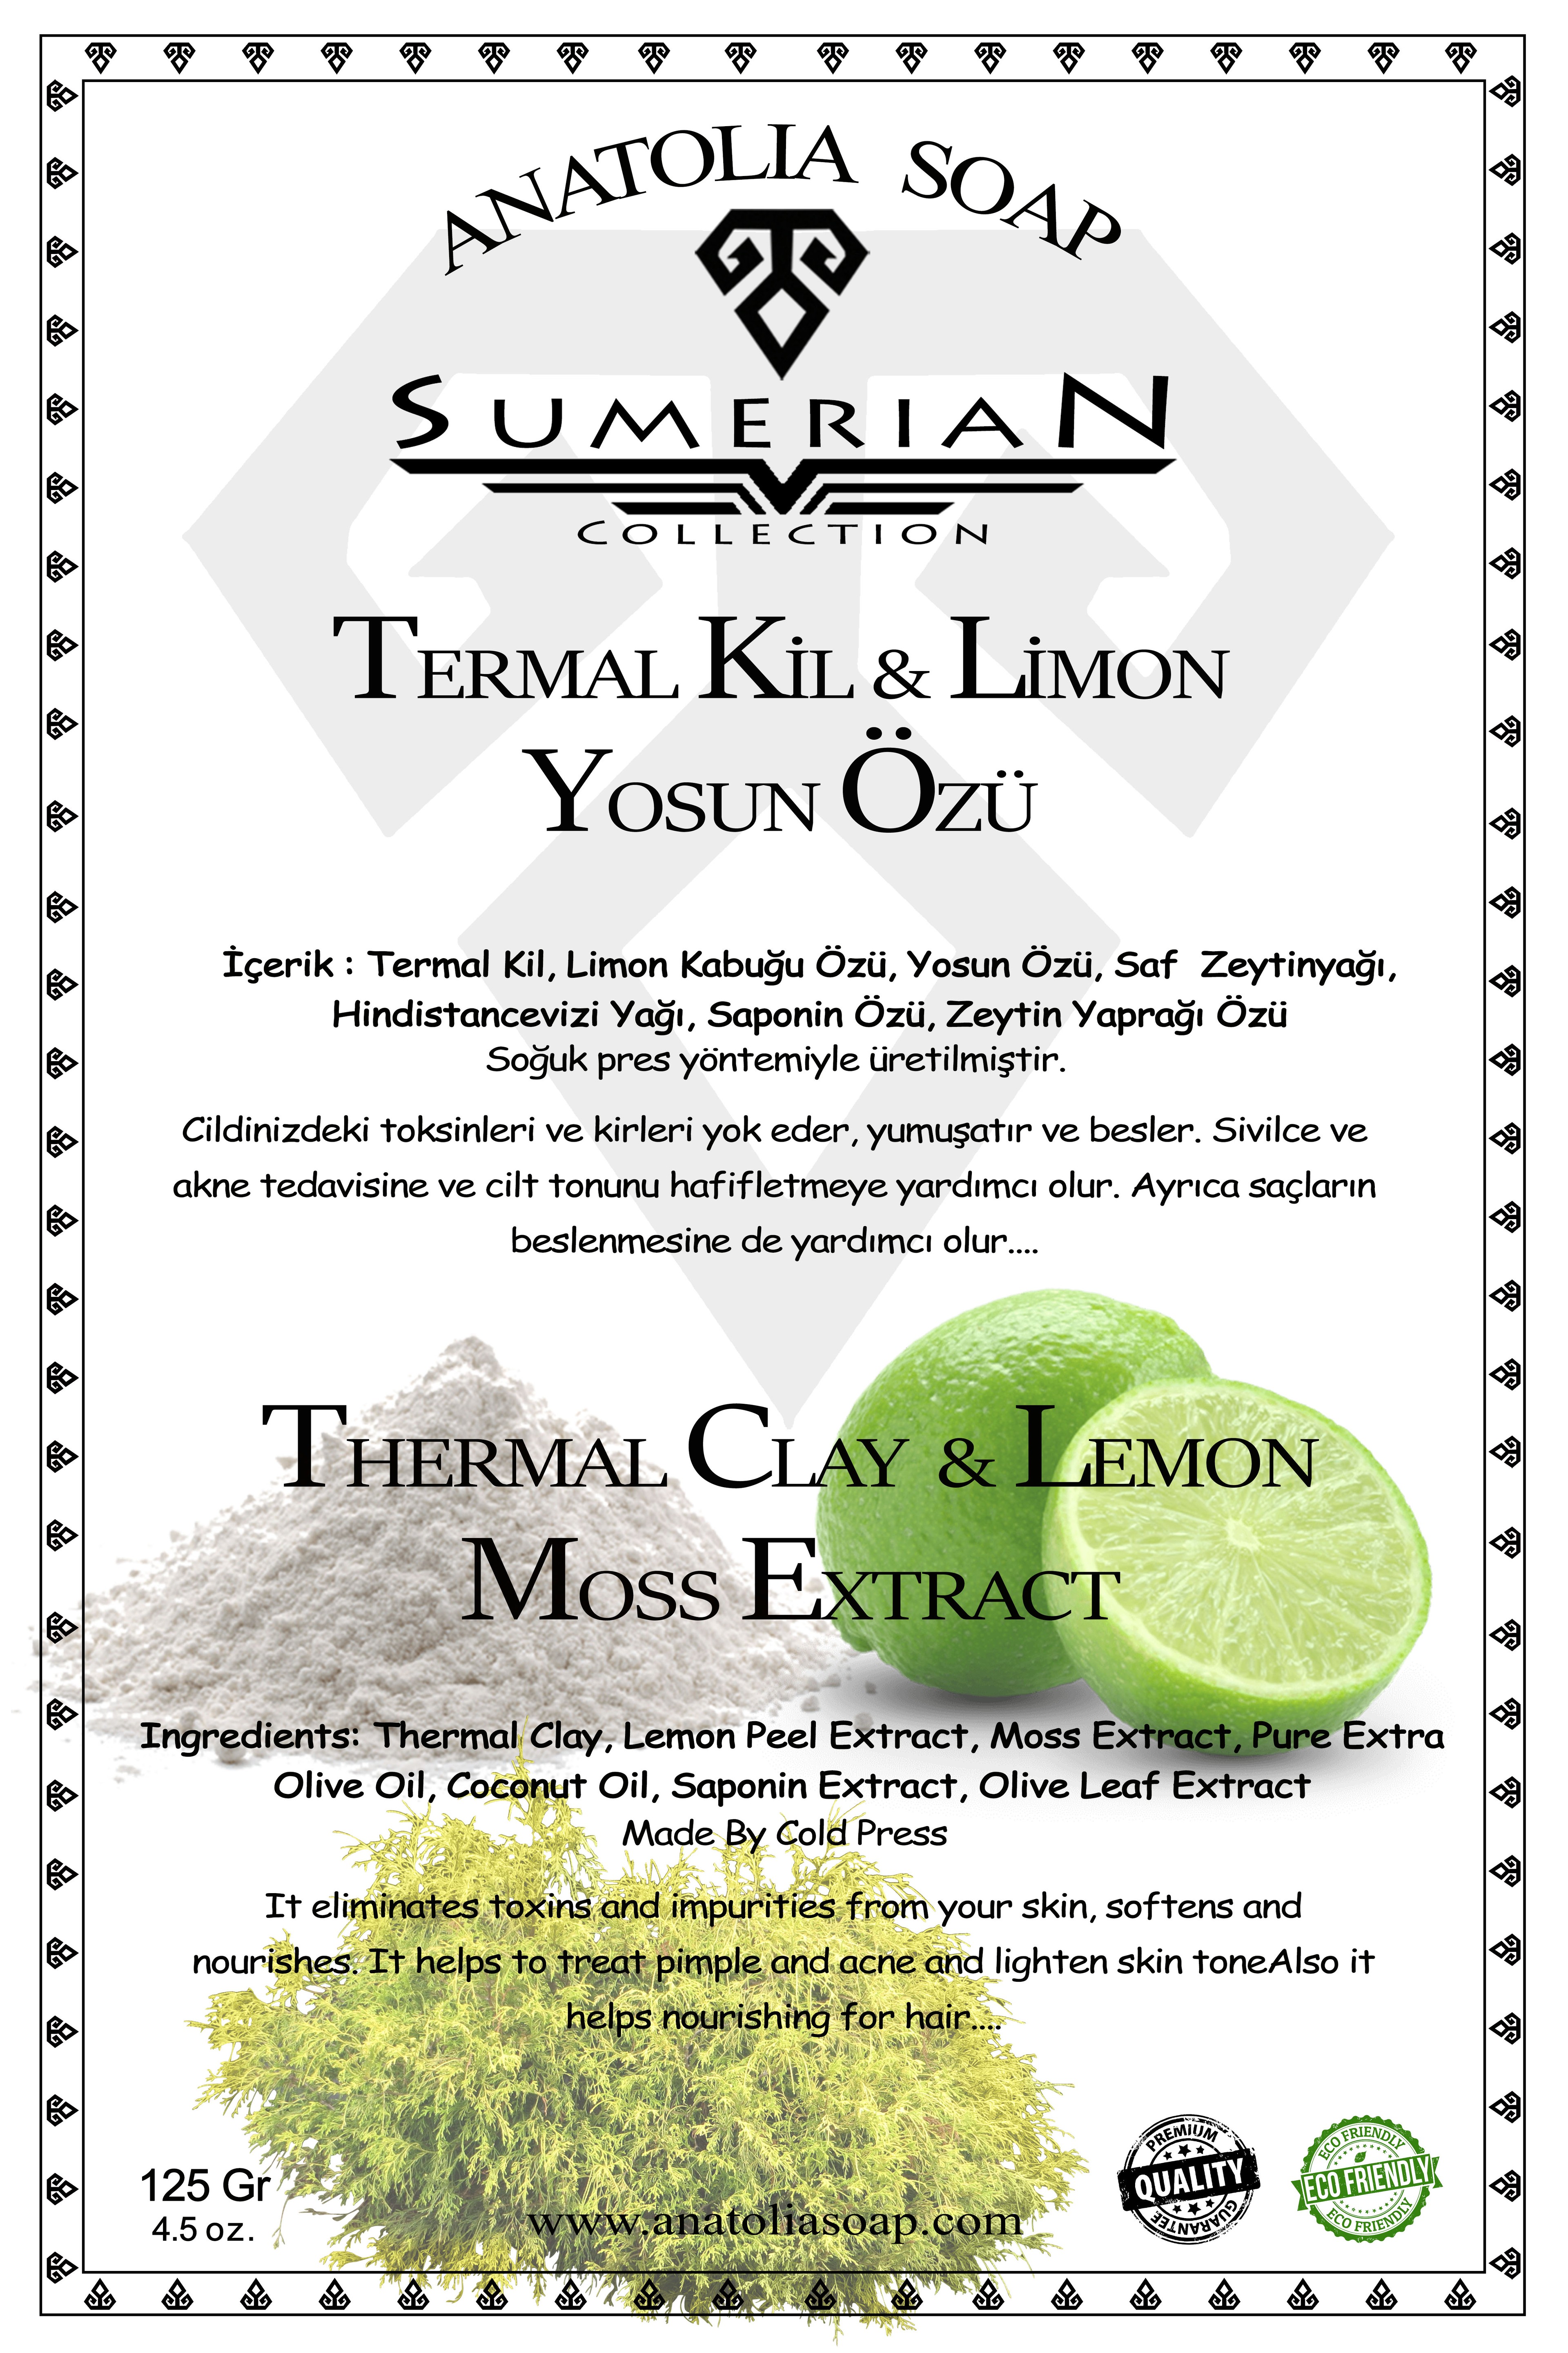 Make a Natural Mask for Your Skin with Sumerian Collection Seaweed Thermal Clay Lemon Soap.